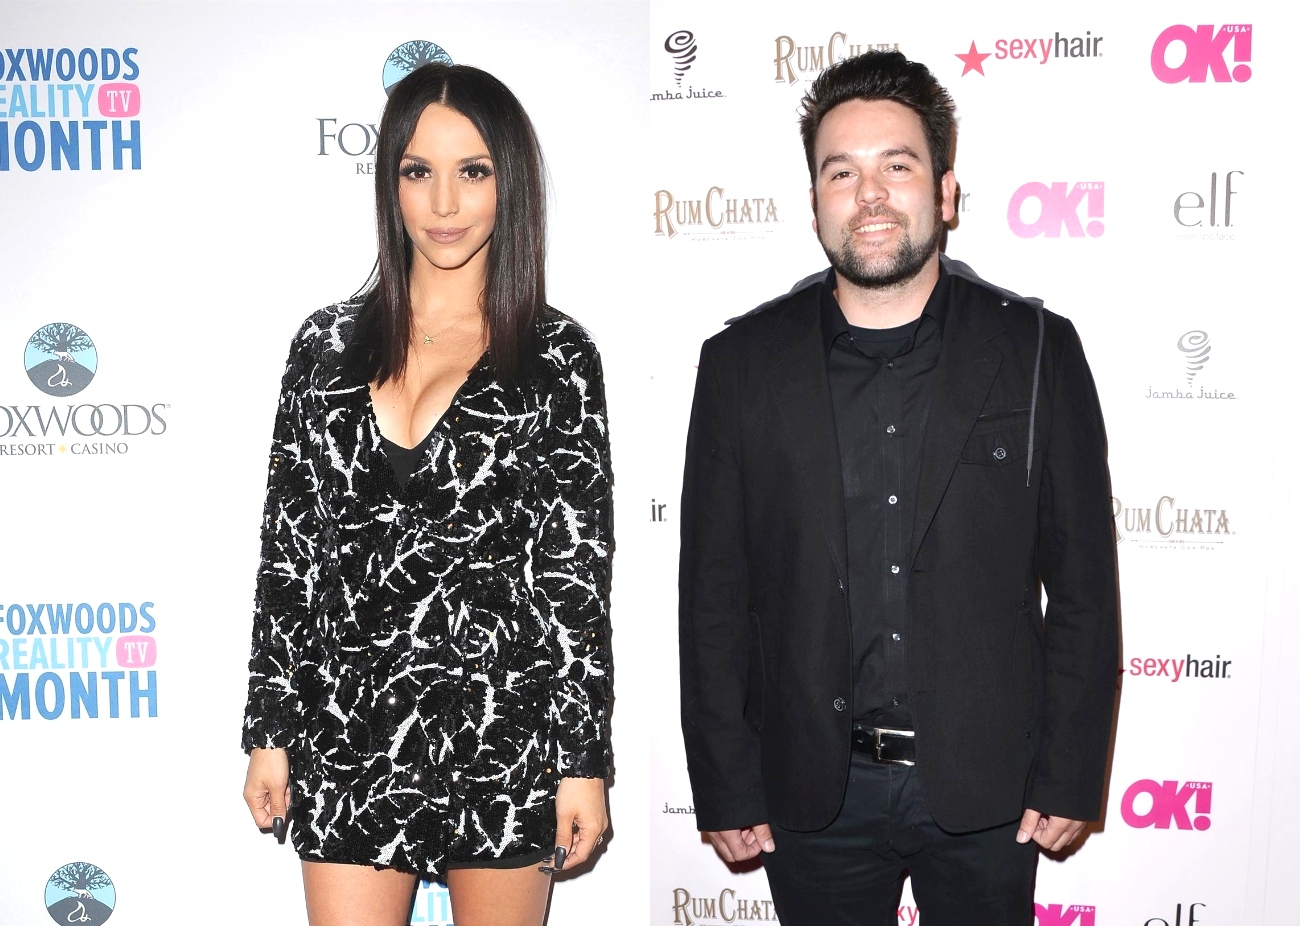 Vanderpump Rules' Scheana Shay Reveals How Ex-Husband Mike Shay Reacted After She Reached Out to Him on Their Anniversary